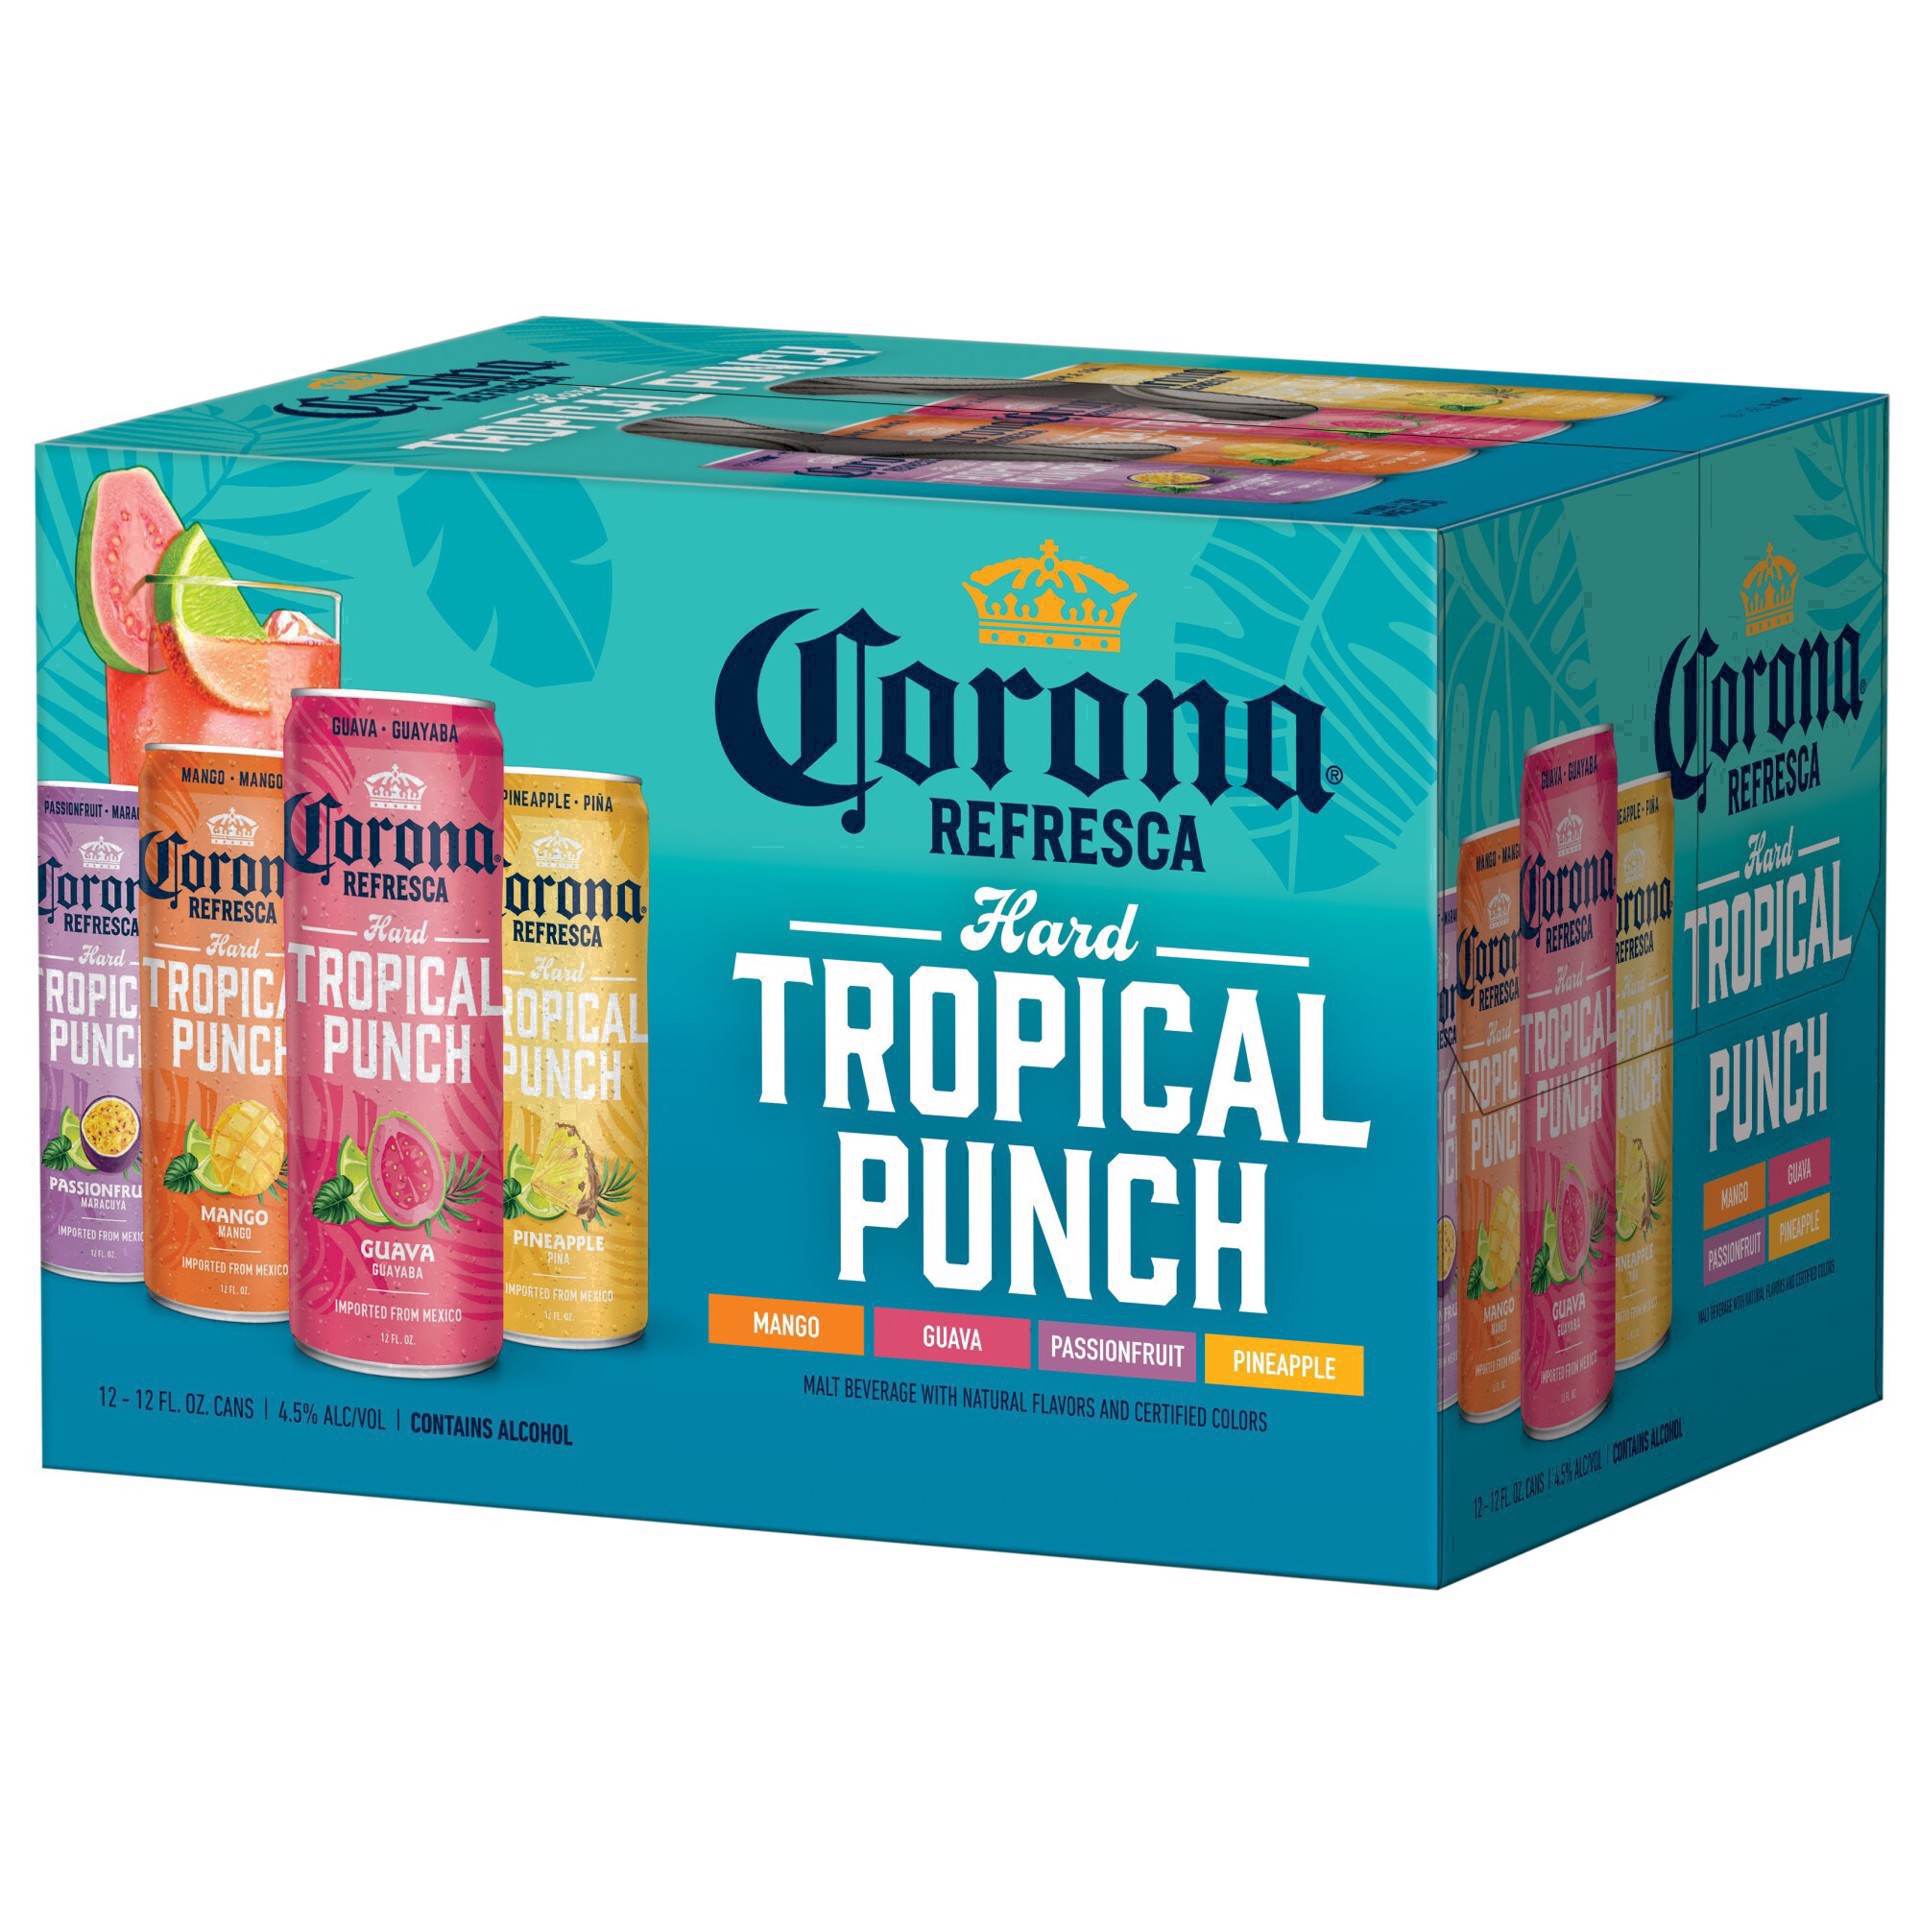 slide 63 of 113, Corona Refresca Hard Tropical Punch Variety Pack Cans, 144 fl oz